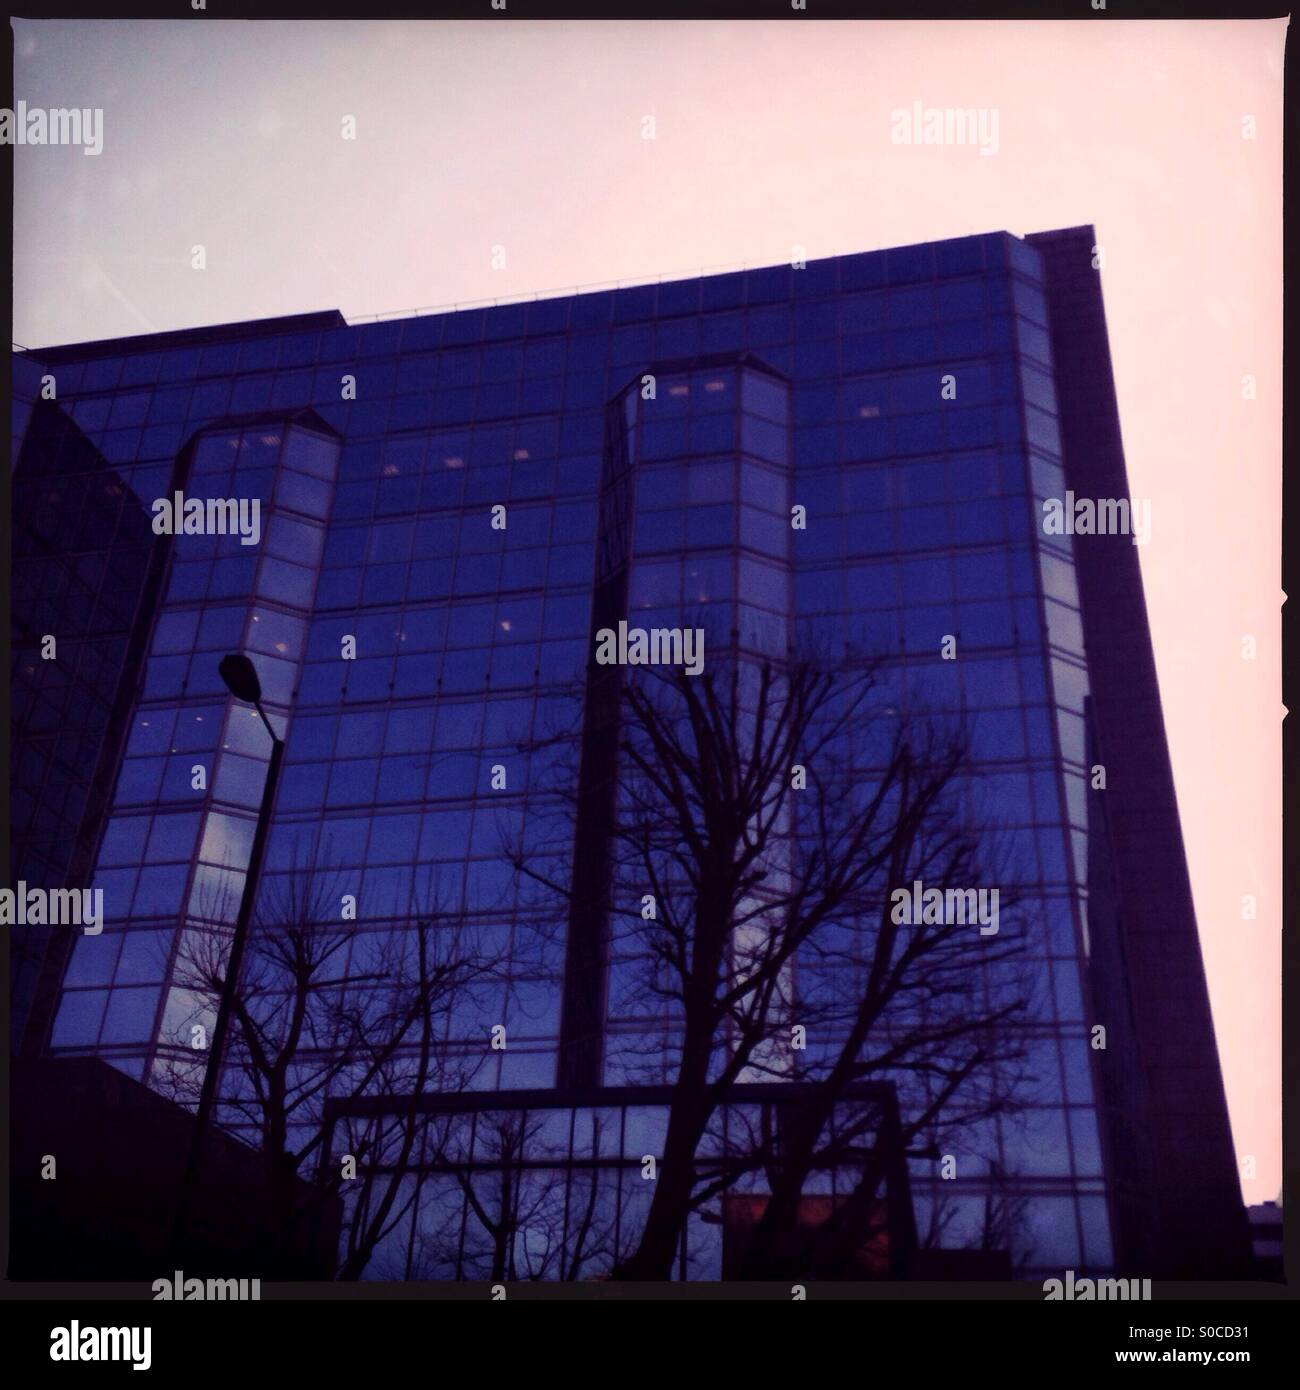 Modern office building with mirrored windows. Trees silhouetted in front of building Stock Photo